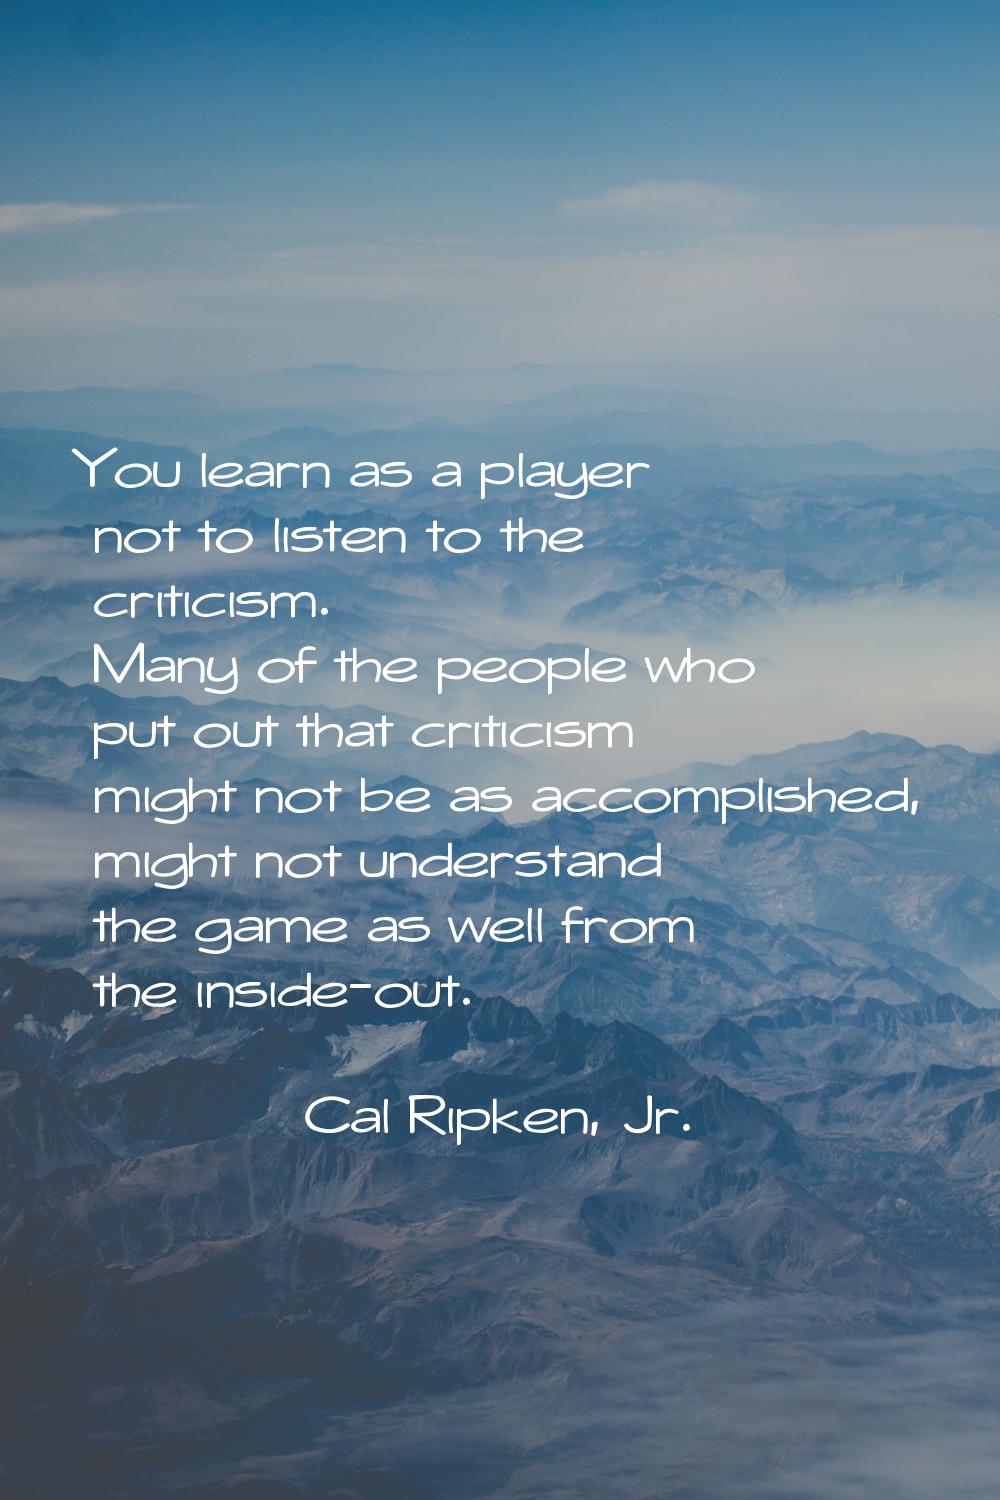 You learn as a player not to listen to the criticism. Many of the people who put out that criticism